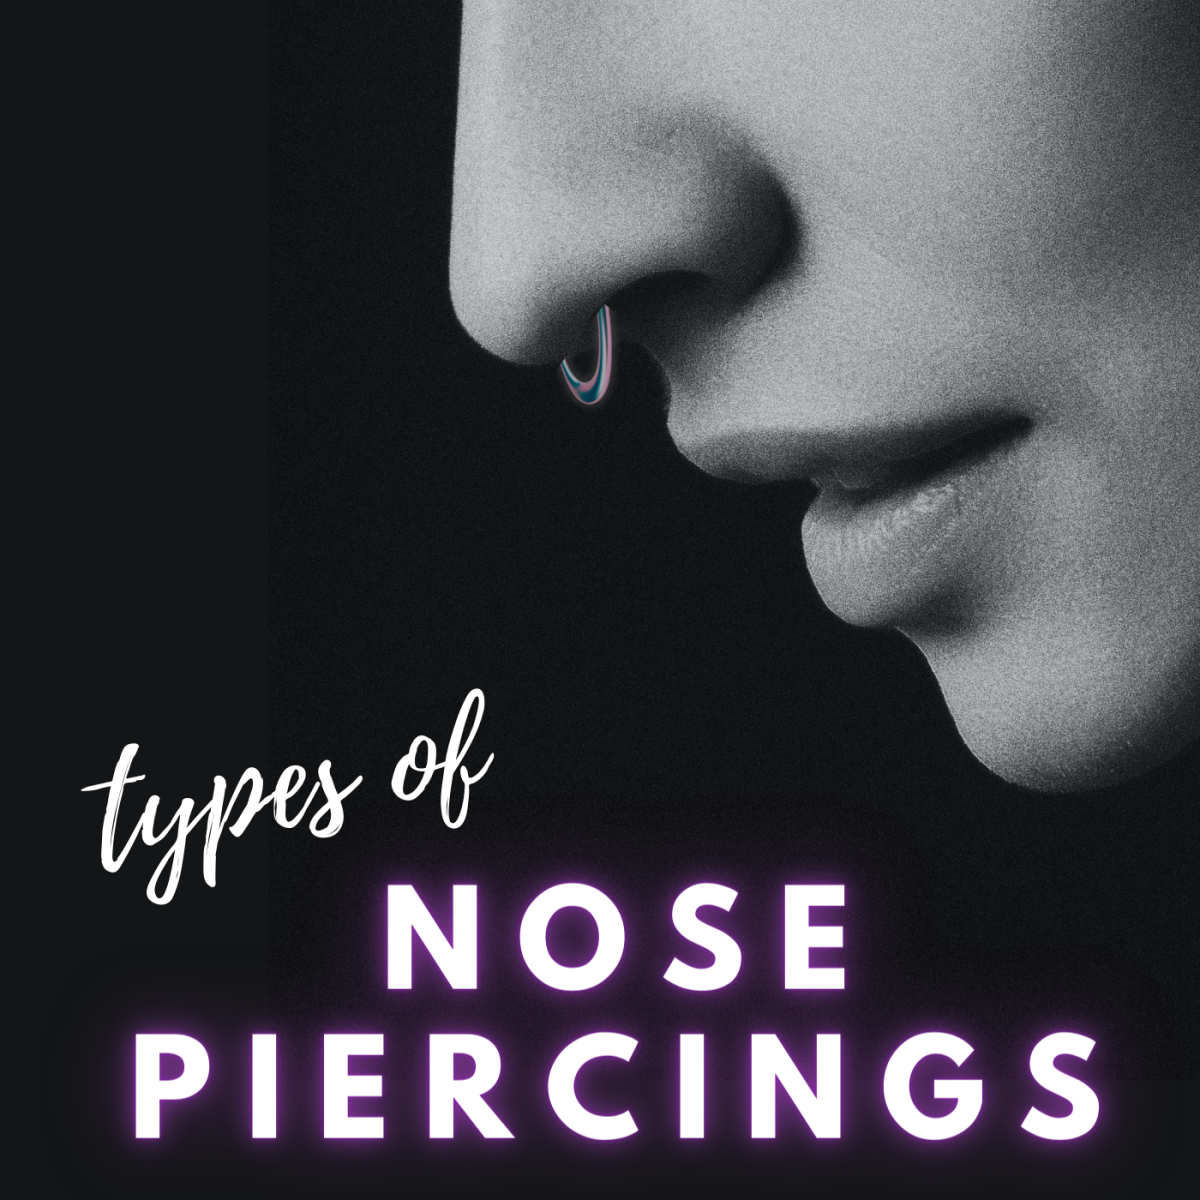 Several different types of nose piercings for you to consider.